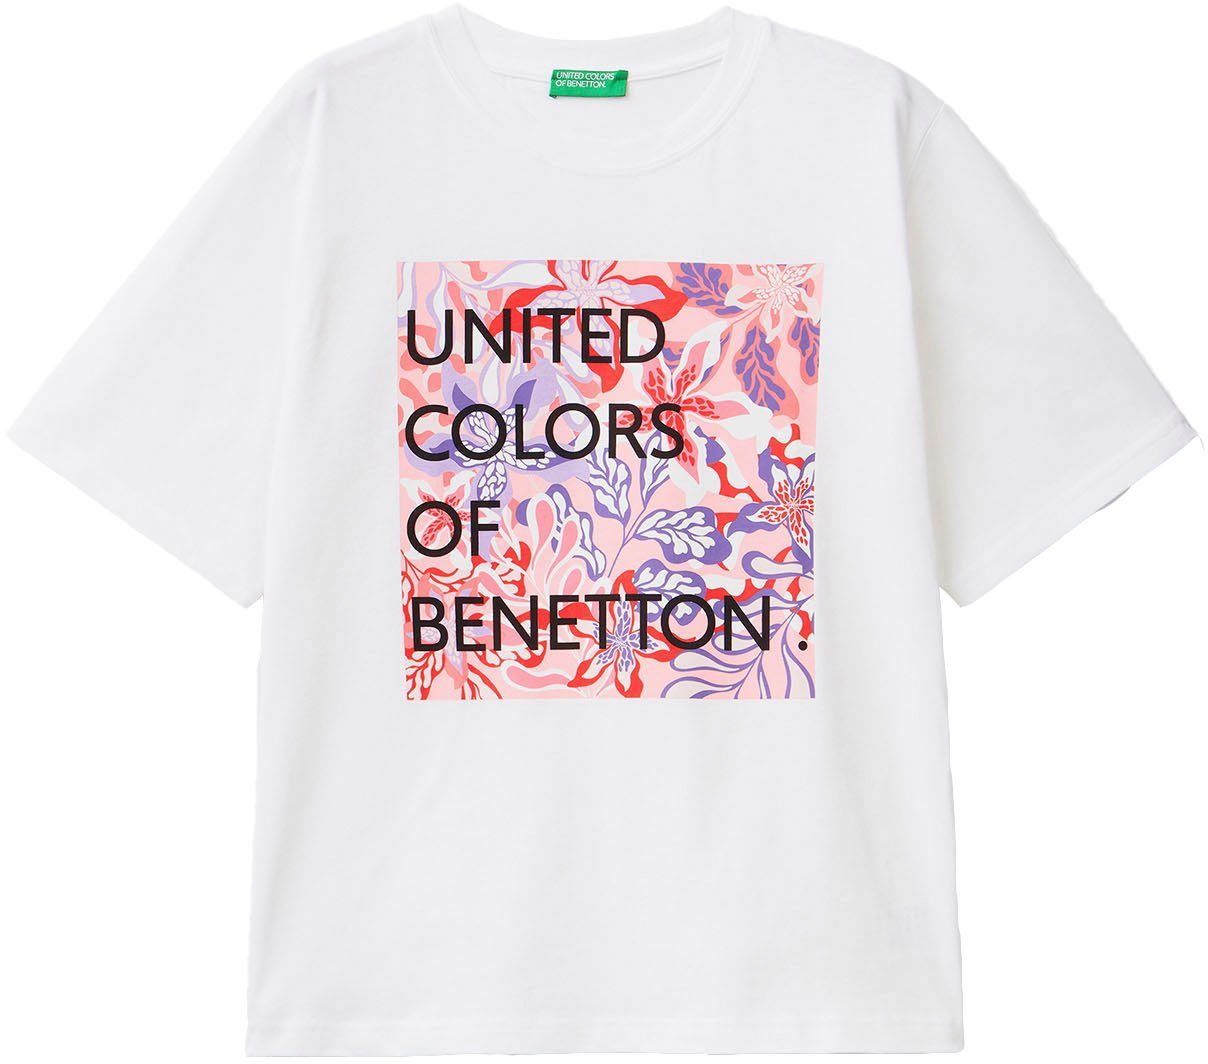 pink mit weiß Colors T-Shirt Benetton United of